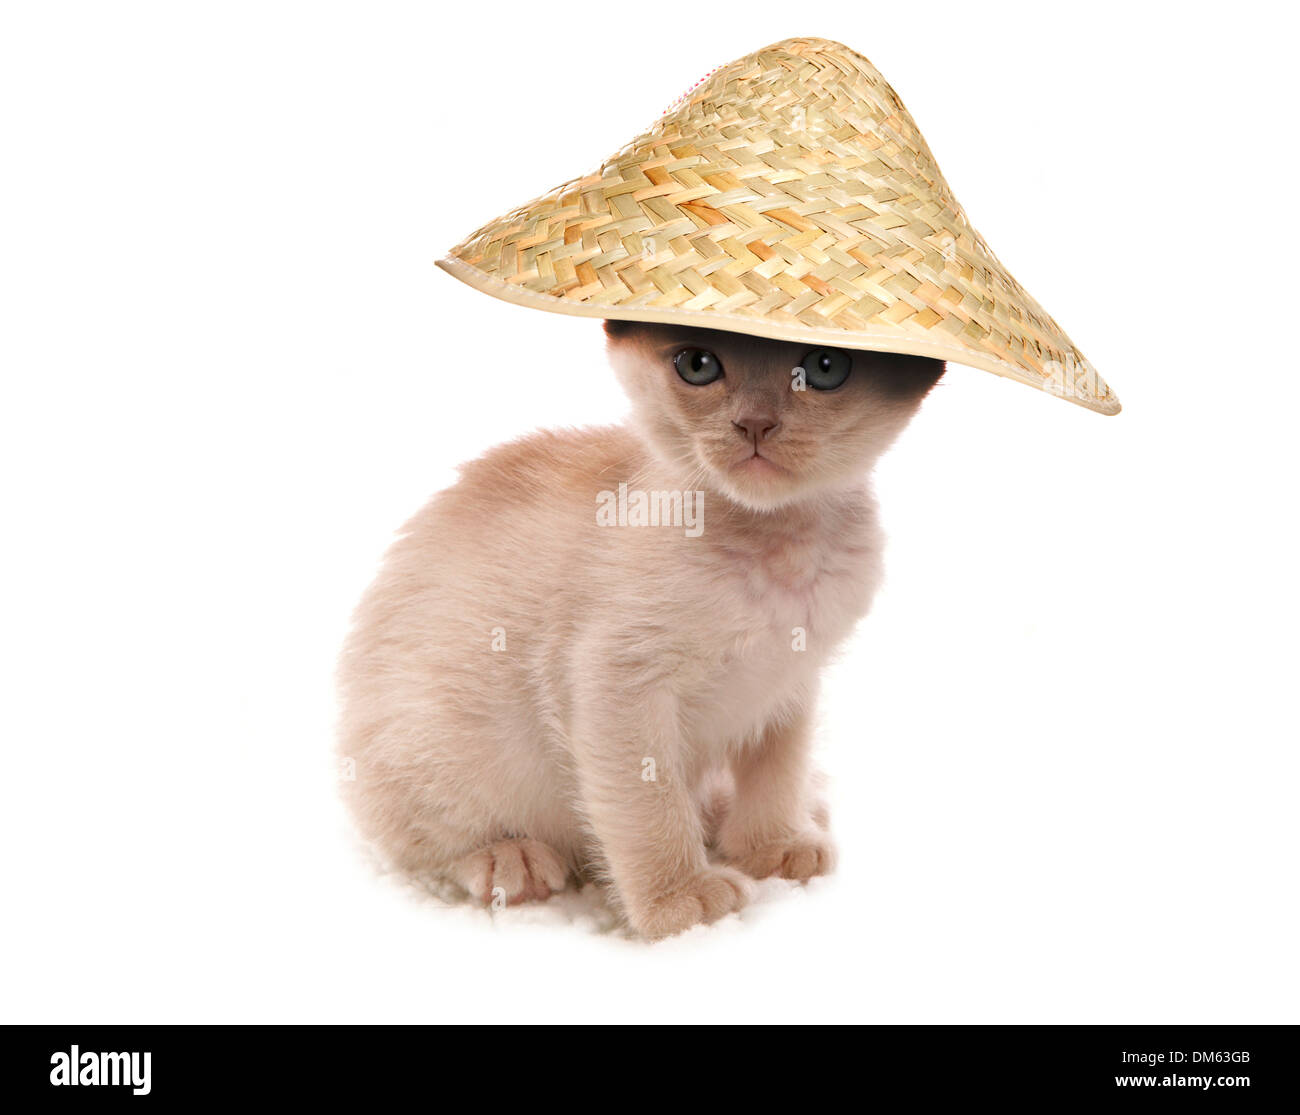 Burmese cat. Cream kitten wearing conical Asian hat. Studio picture against a white background Stock Photo